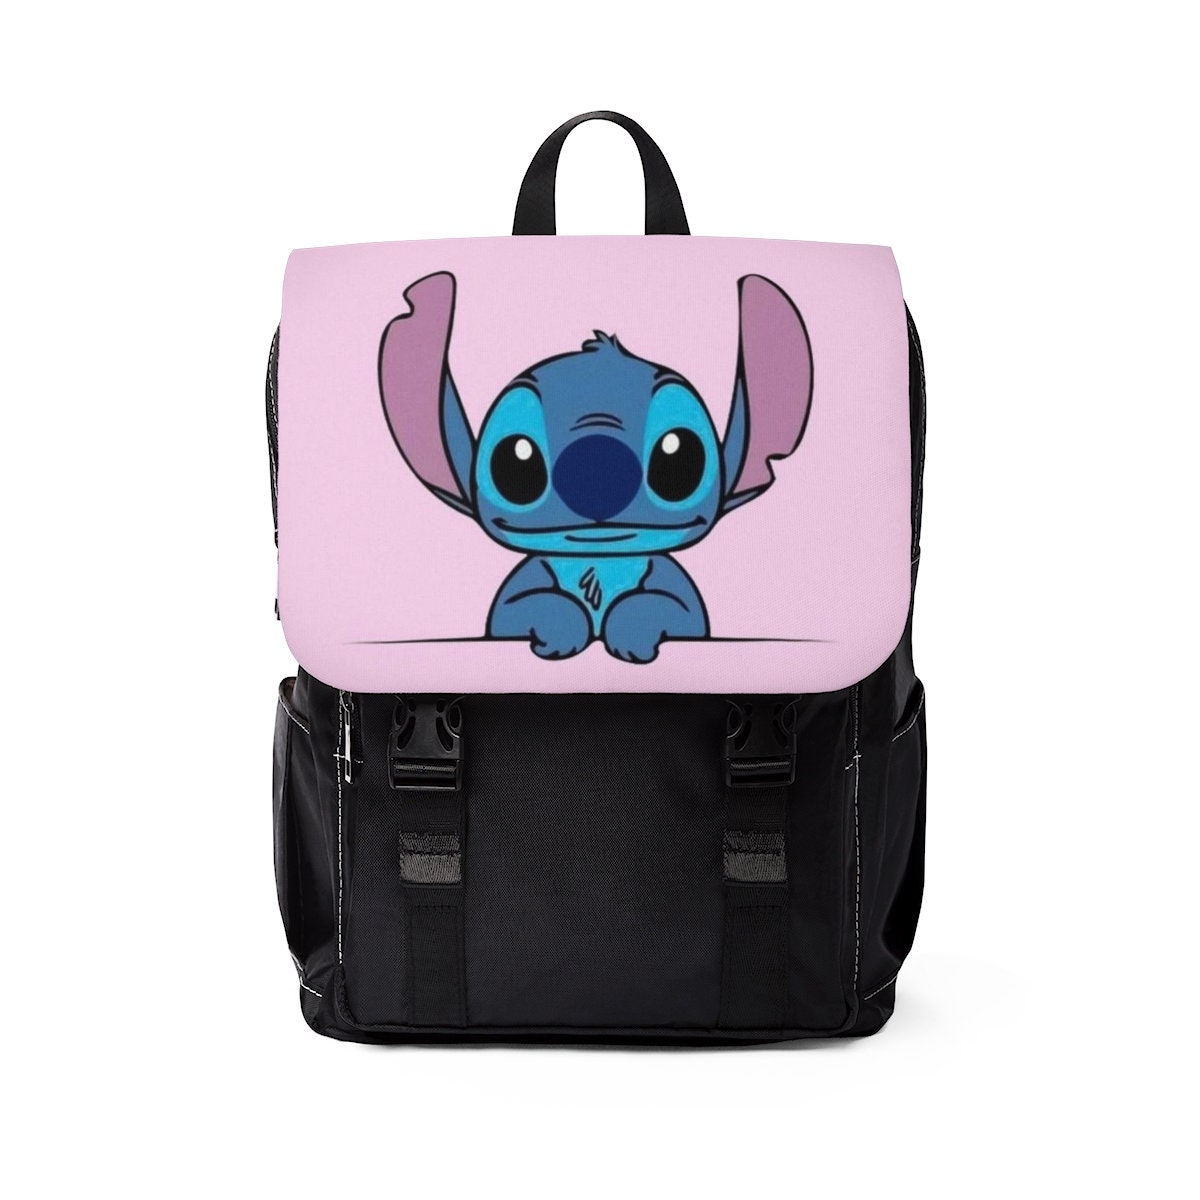 Discover Stitch Unisex Casual Shoulder Backpack, Stitch Backpack